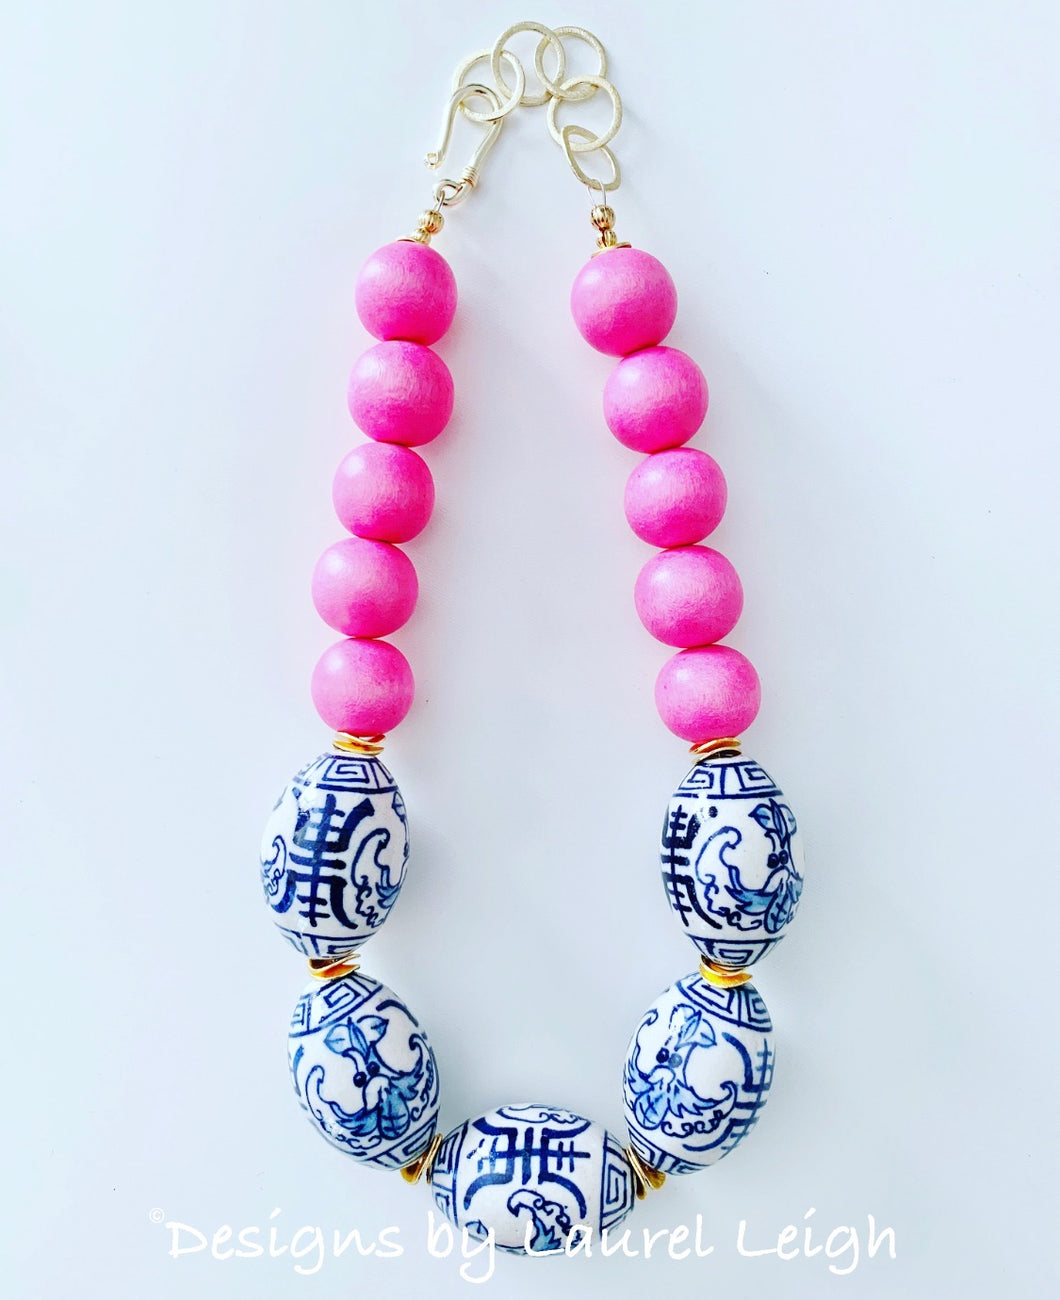 Blue and White Chinoiserie Chunky Statement Necklace - Bright Bubblegum Pink - Ginger jar